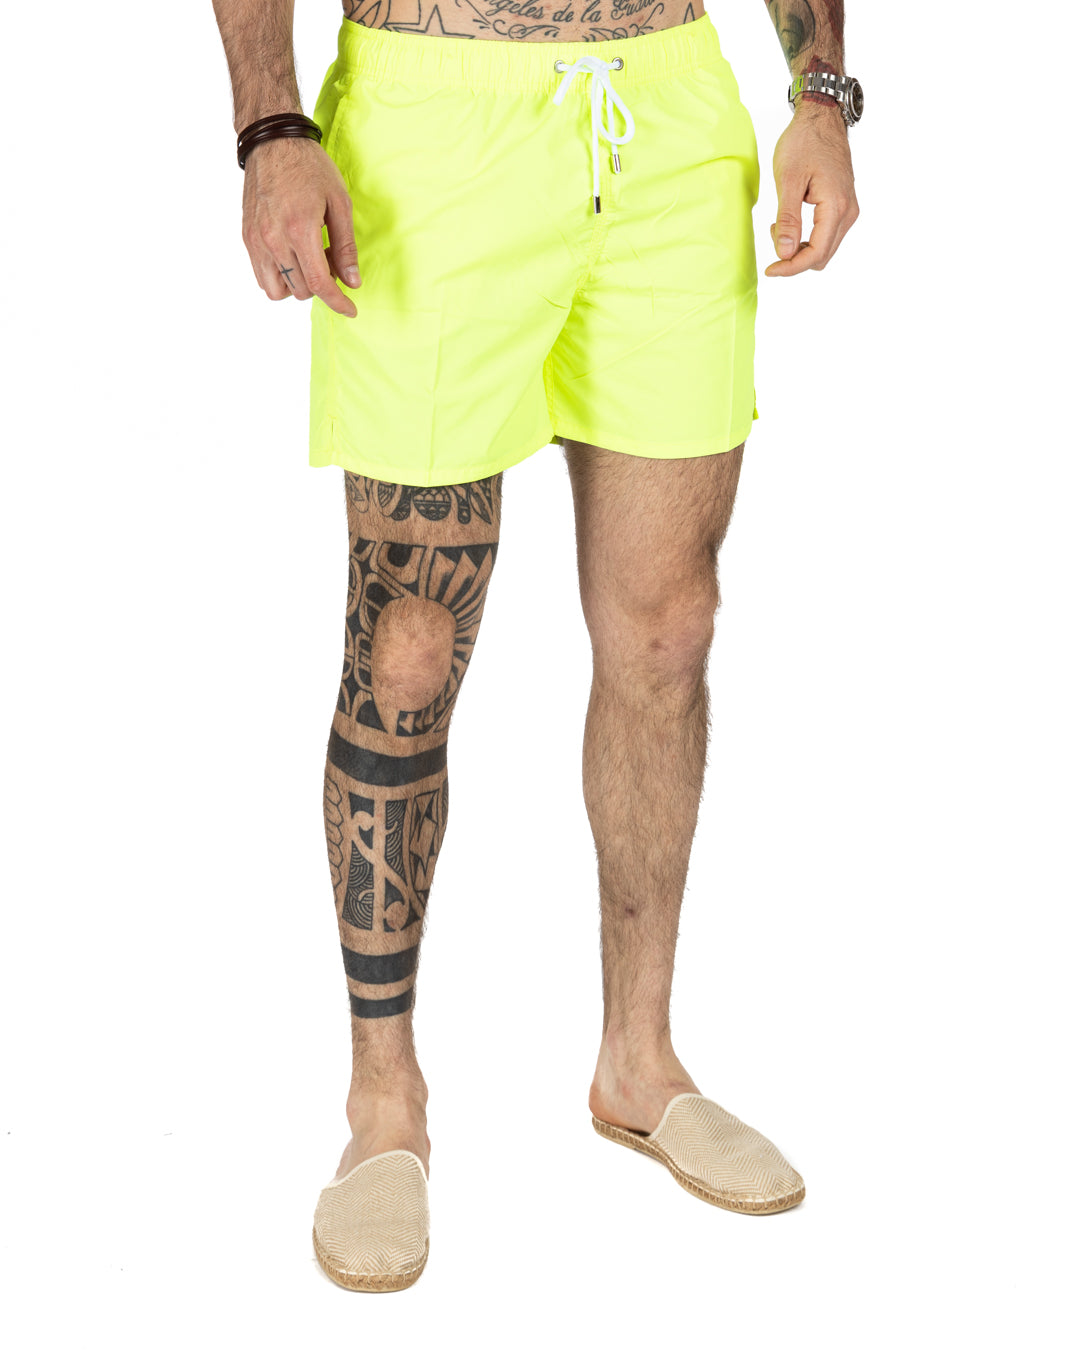 Swimsuit - Solid fluorescent yellow color